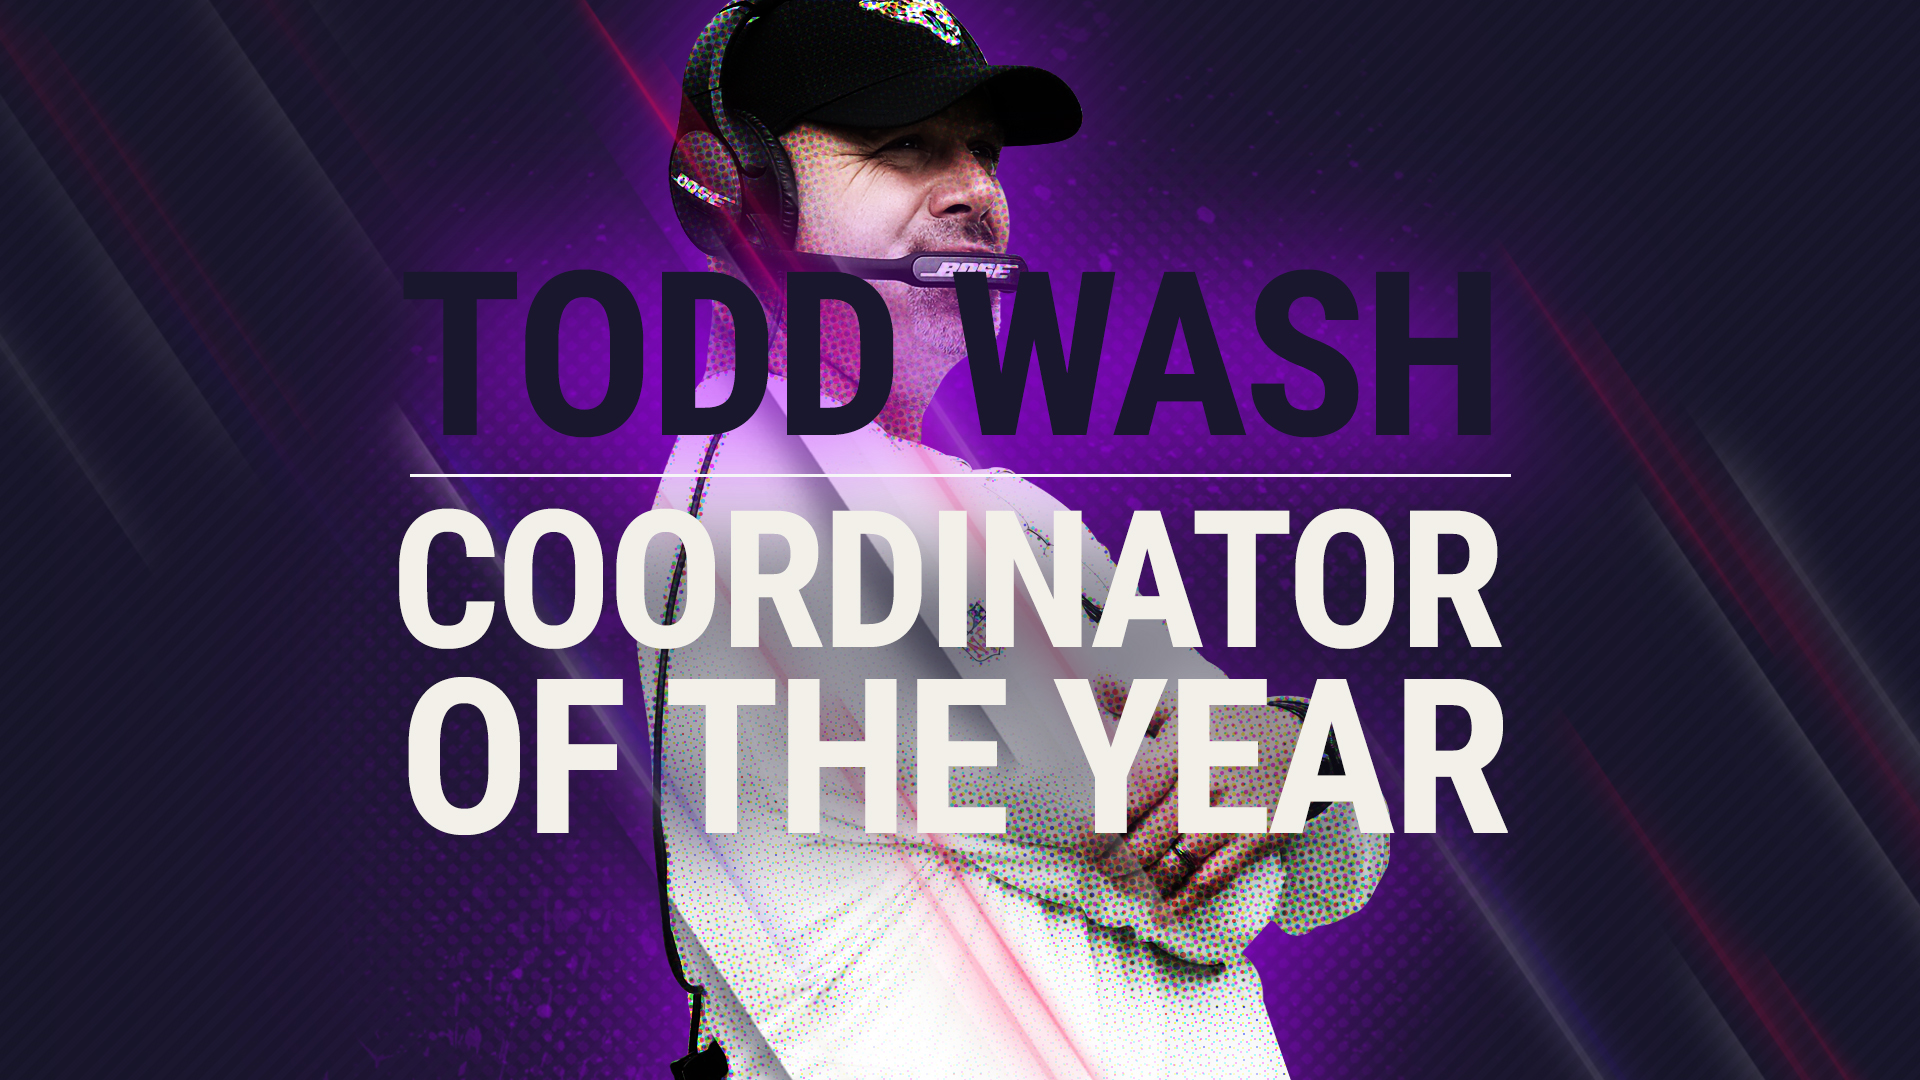 NFL coaches vote Todd Wash Sporting News Coordinator of the Year for 2017